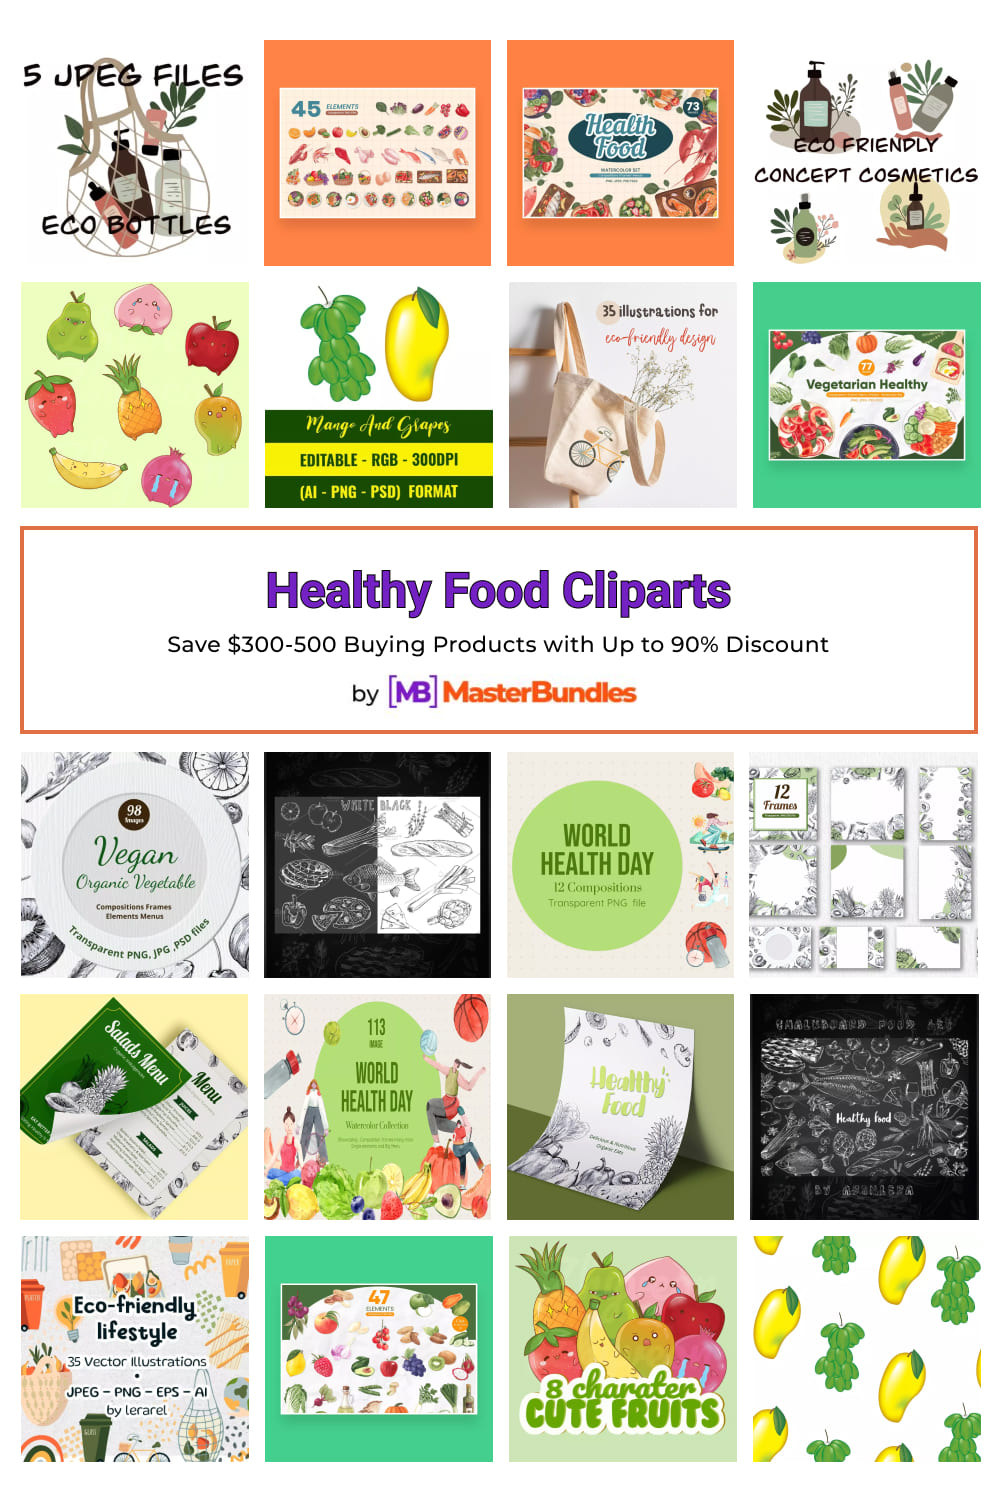 Healthy Food Cliparts for Pinterest.